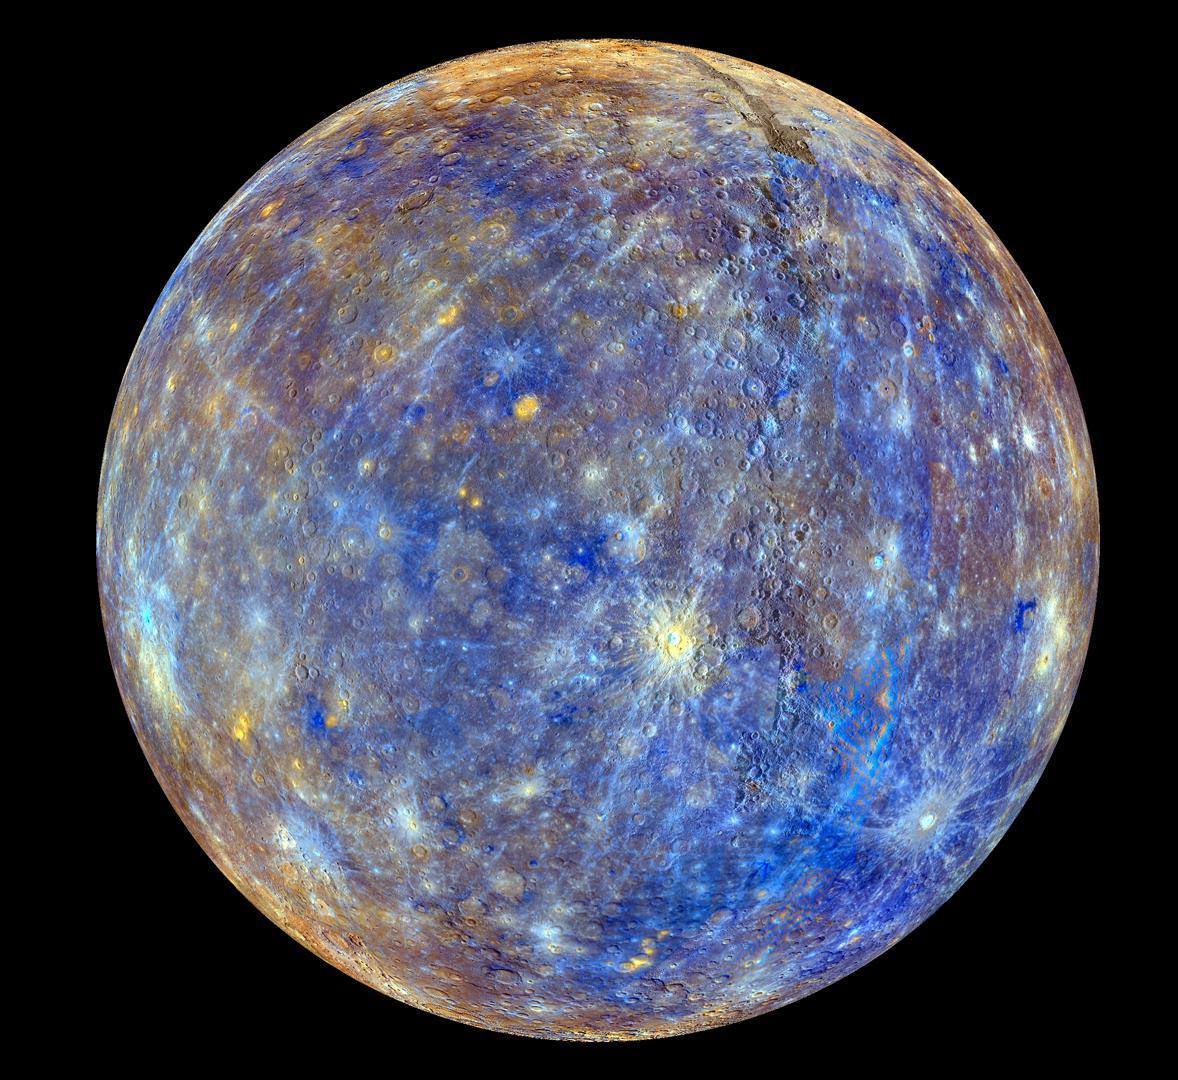 baelor:
“ becomming:
“ xlizardx:
“ Apparently this is “The clearest photo of Mercury ever taken.” ”
why isnt everyone getting so excited about this, it is literally another planet look at how beautiful it is stop what your doing and look at how alien...